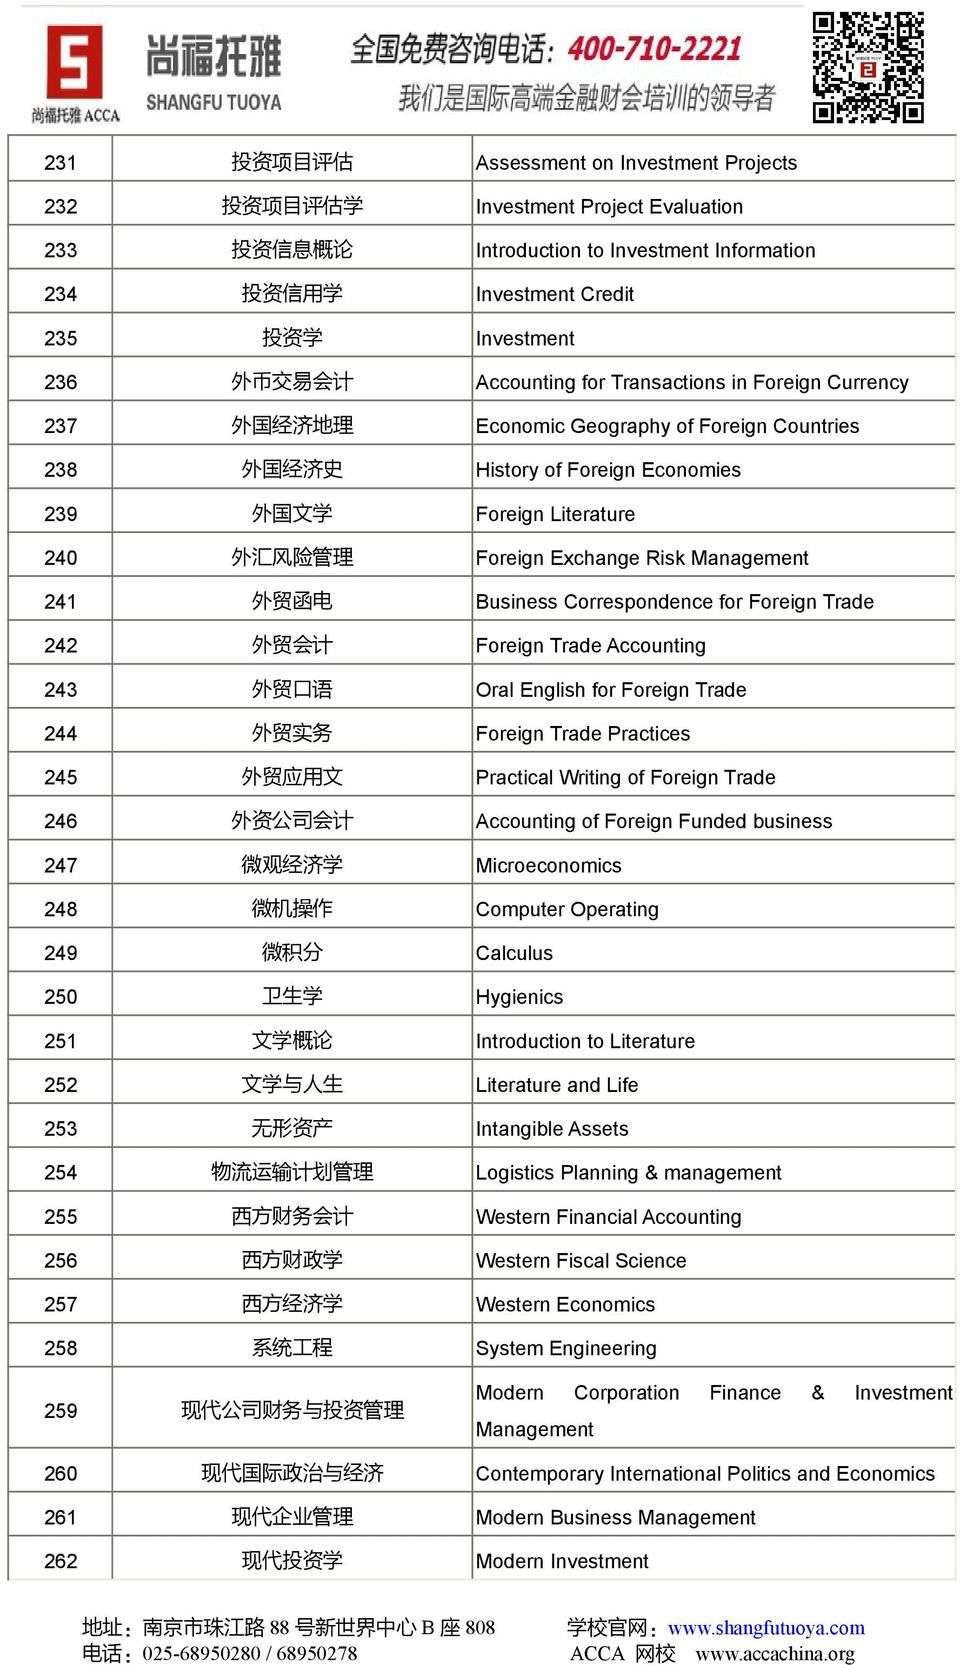 Literature 240 外 汇 风 险 管 理 Foreign Exchange Risk Management 241 外 贸 函 电 Business Correspondence for Foreign Trade 242 外 贸 会 计 Foreign Trade Accounting 243 外 贸 口 语 Oral English for Foreign Trade 244 外